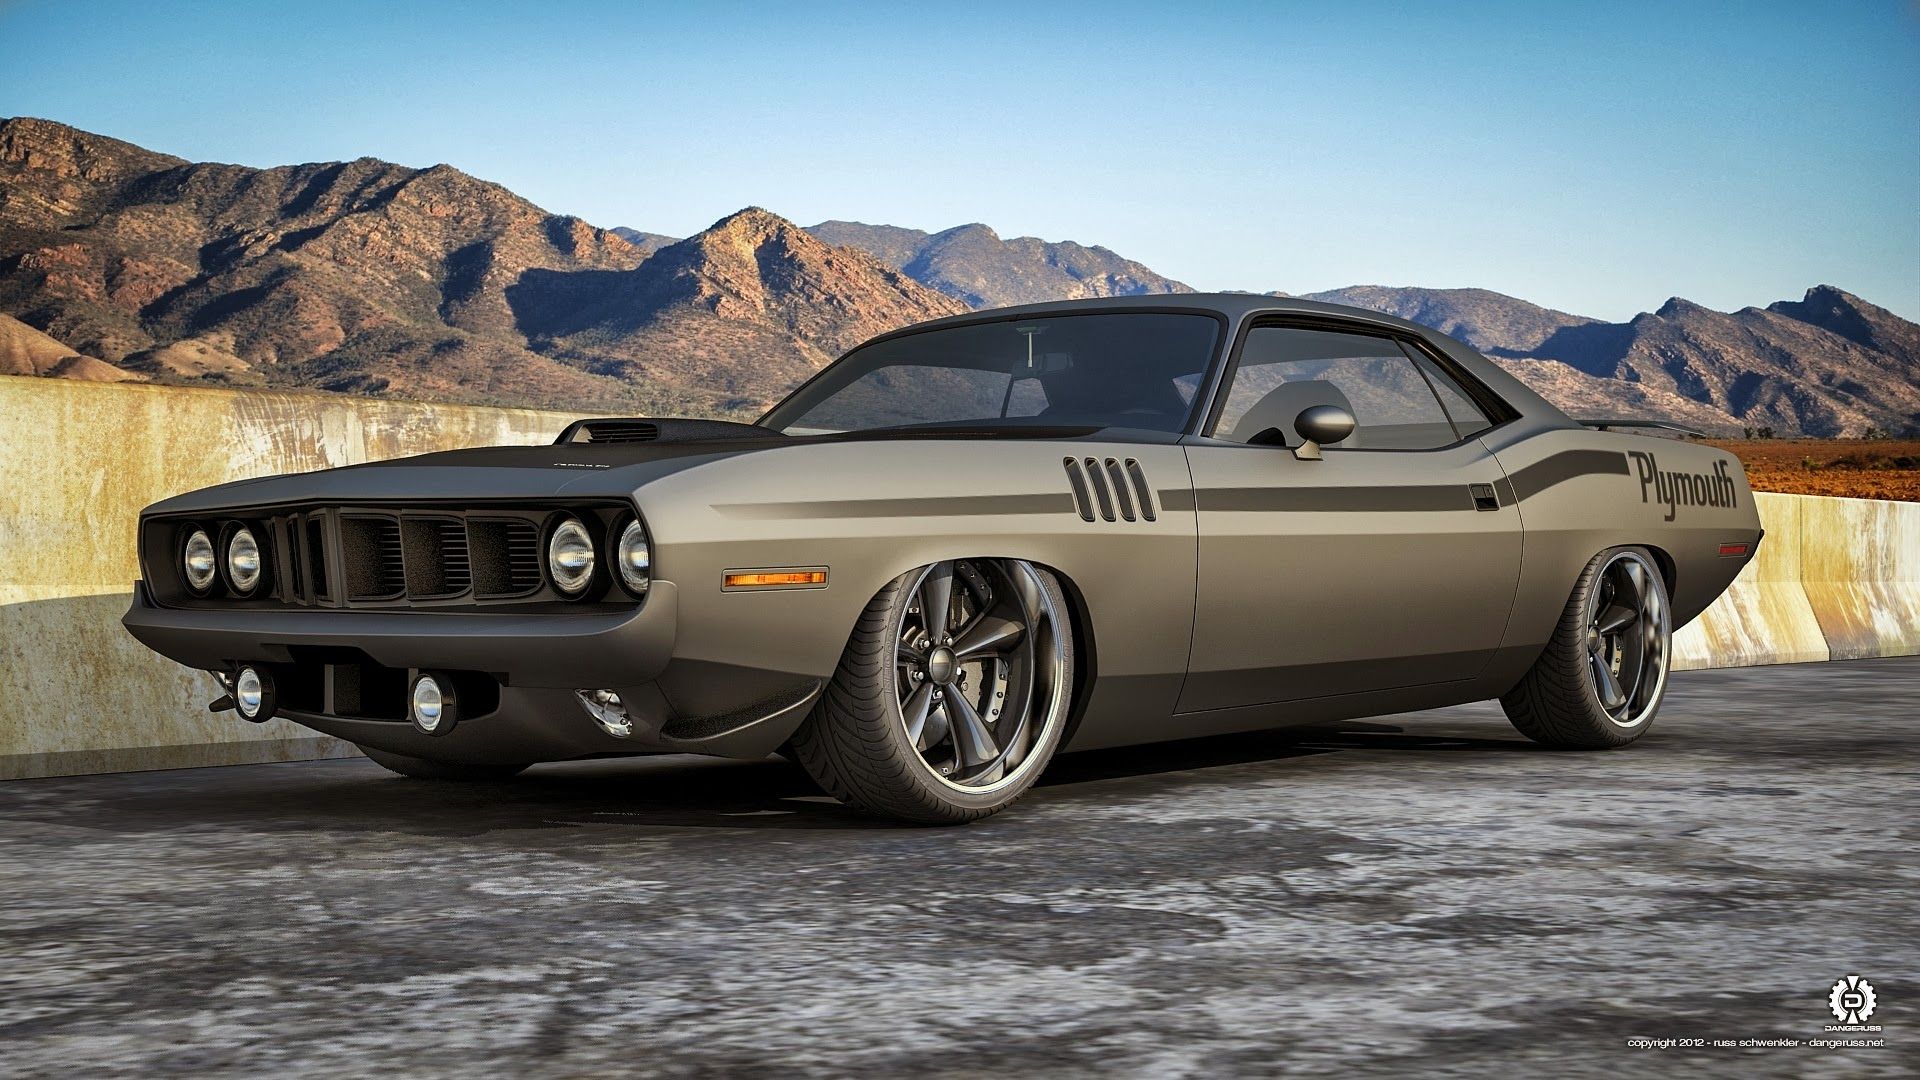 Carros Cl Sicos Of View Hd Wallpaper - Plymouth Barracuda Muscle Cars , HD Wallpaper & Backgrounds